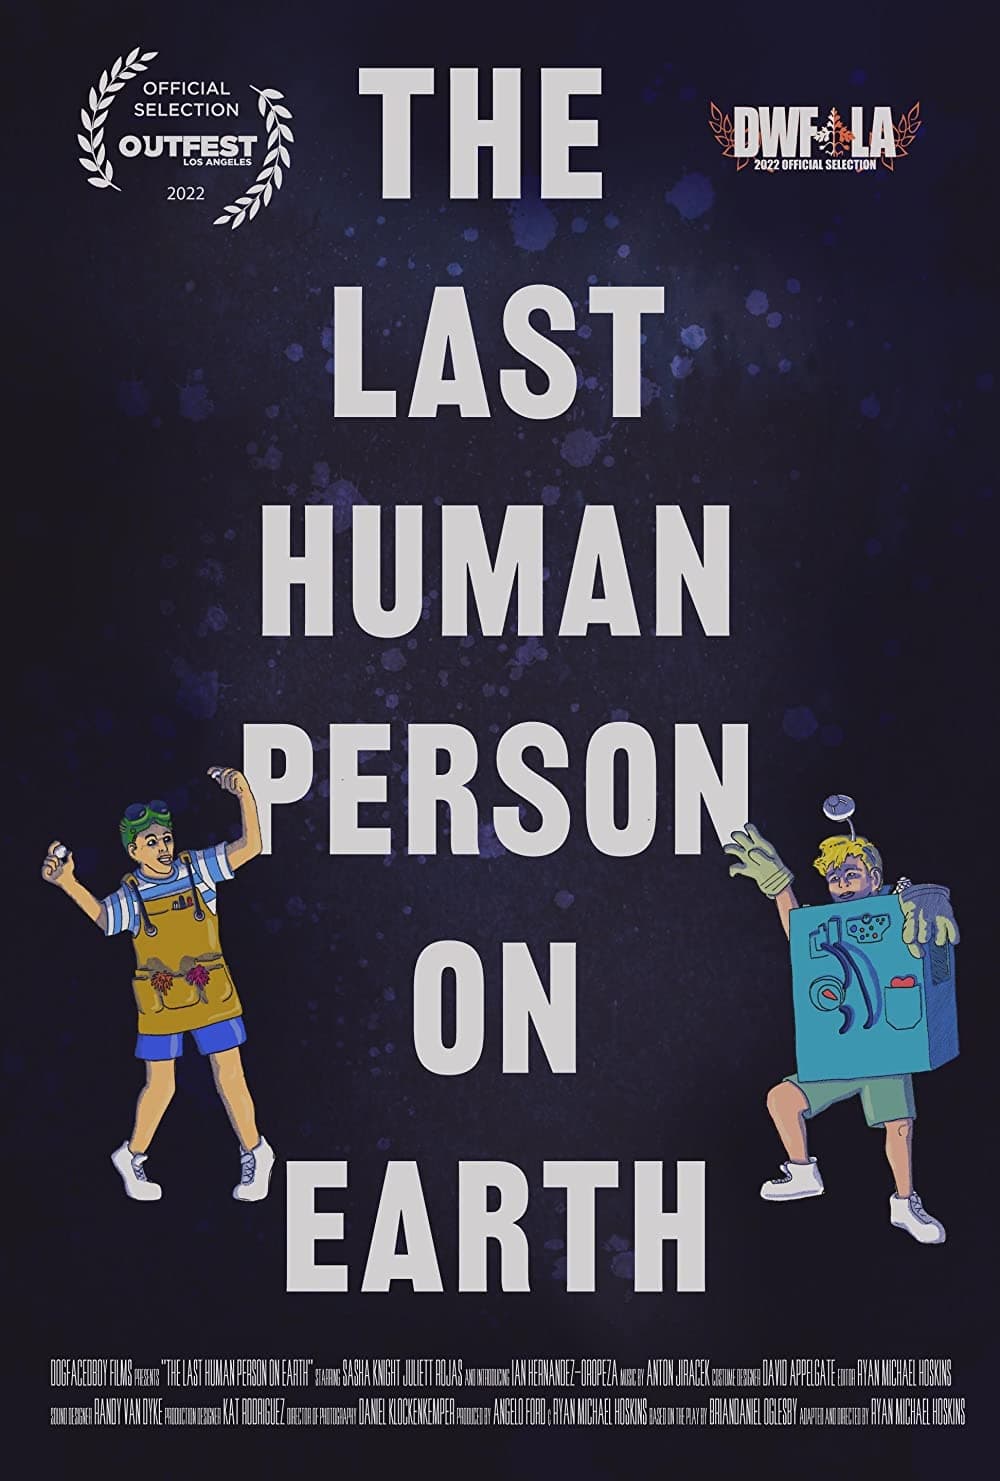 The Last Human Person on Earth